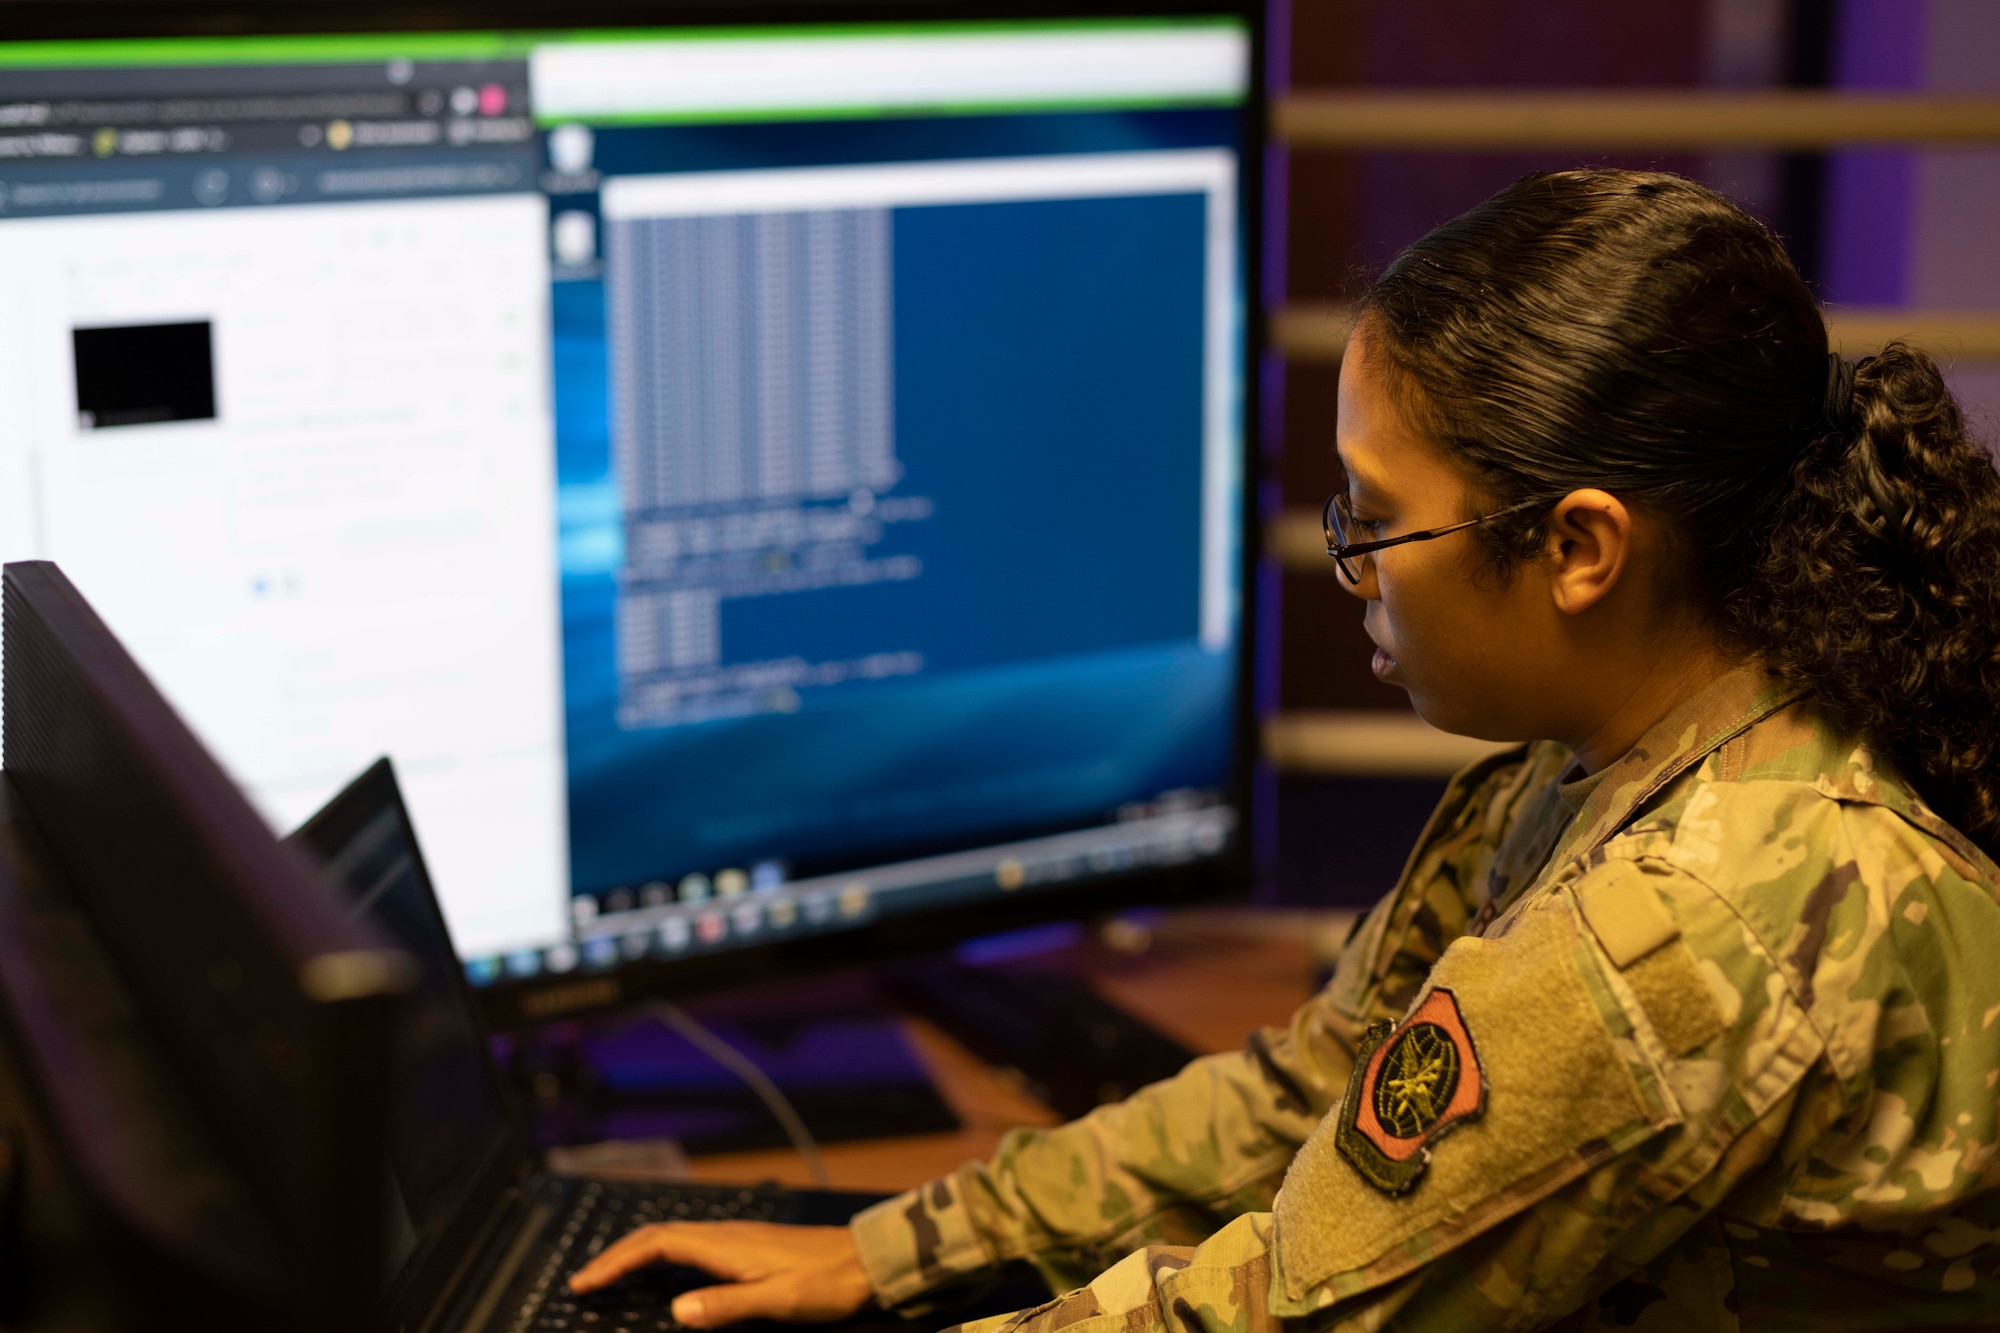 U.S. Air Force Staff Sgt. Pericia Barrow, 60th Communications Squadron cyber systems operator, works on a computer Sept. 23, 2021, at Travis Air Force Base, California. The 60th Communications Squadron maintains and troubleshoots Air Mobility Command’s second largest network, providing secure and non-secure connectivity for Travis AFB’s three wings and 55 partner units. (U.S. Air Force photo by Airman 1st Class Alexander Merchak)